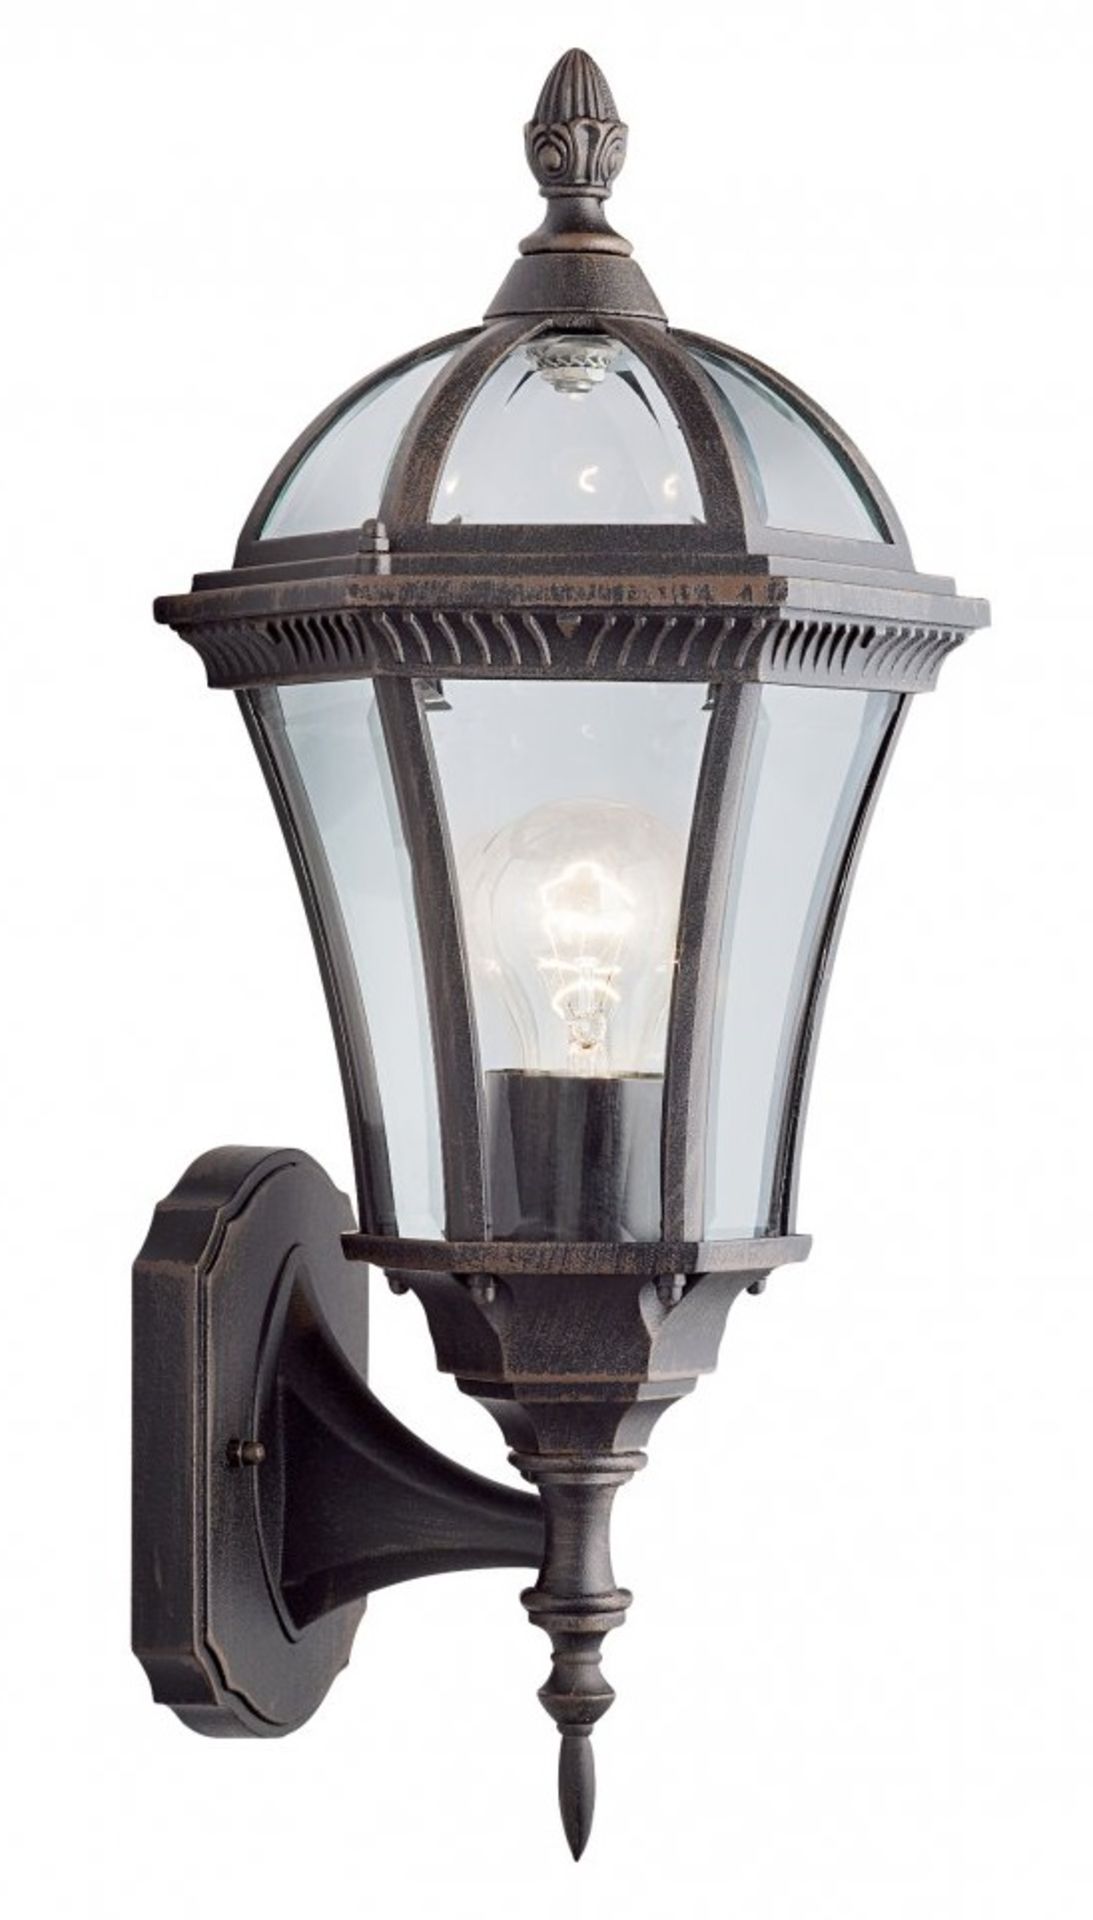 2 x Searchlight Capri Outdoor Wall Lights - Rustic Brown Cast Aluminium IP44 Product Code 1565 - New - Image 3 of 3